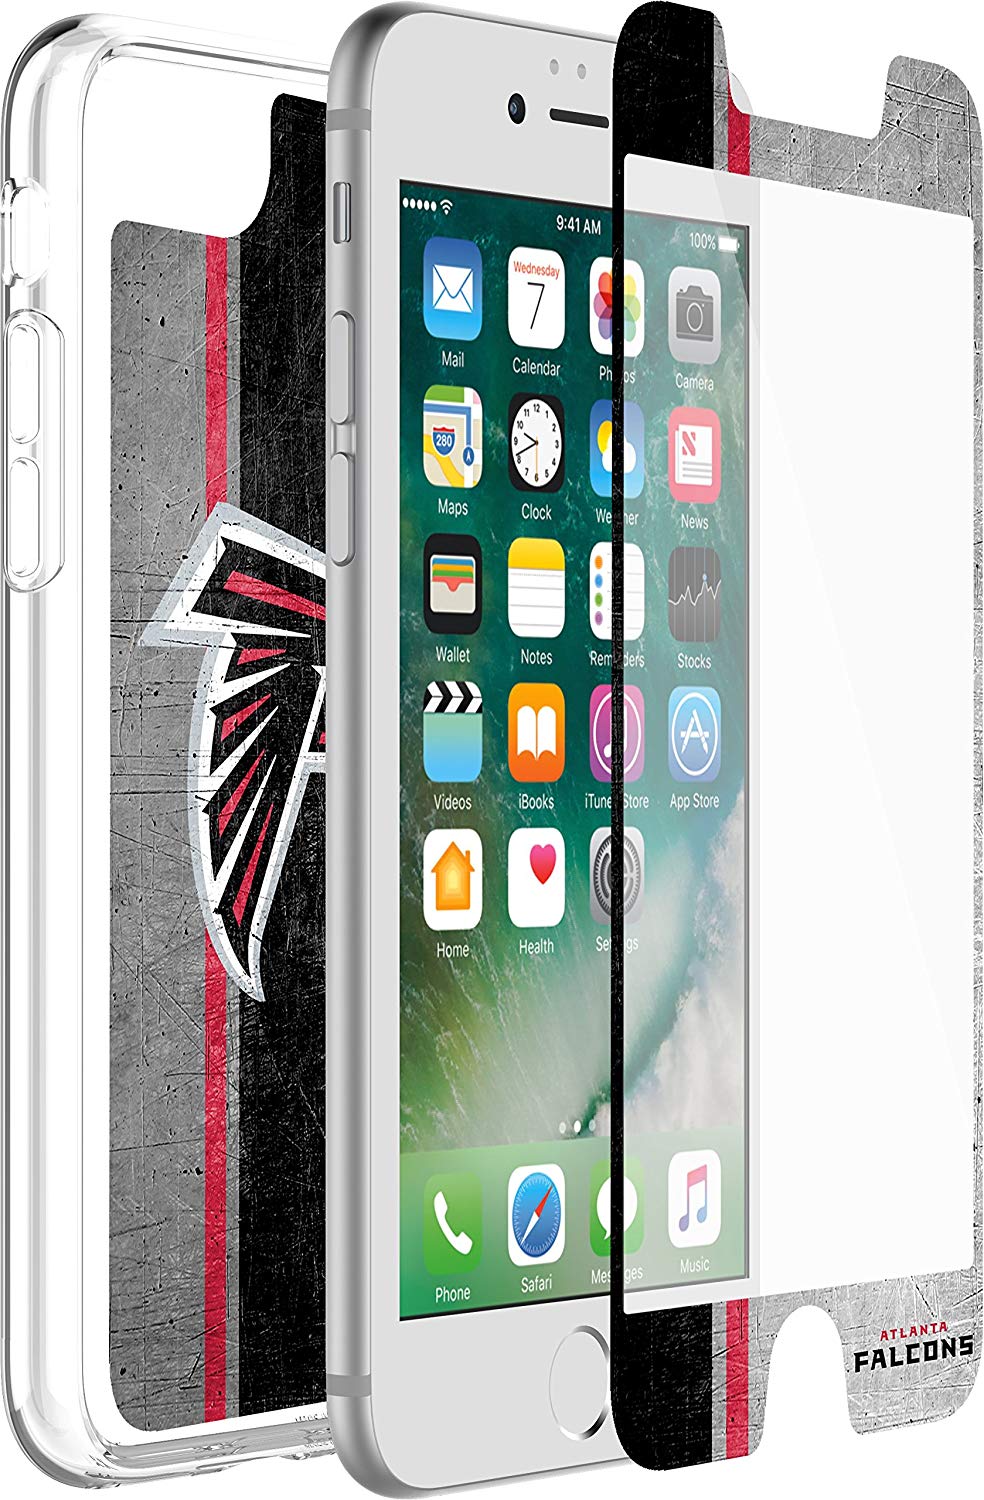 OtterBox ALPHA GLASS Screen Protector for Apple iPhone 6/6S/7/8 - Atlanta Falcons (New)